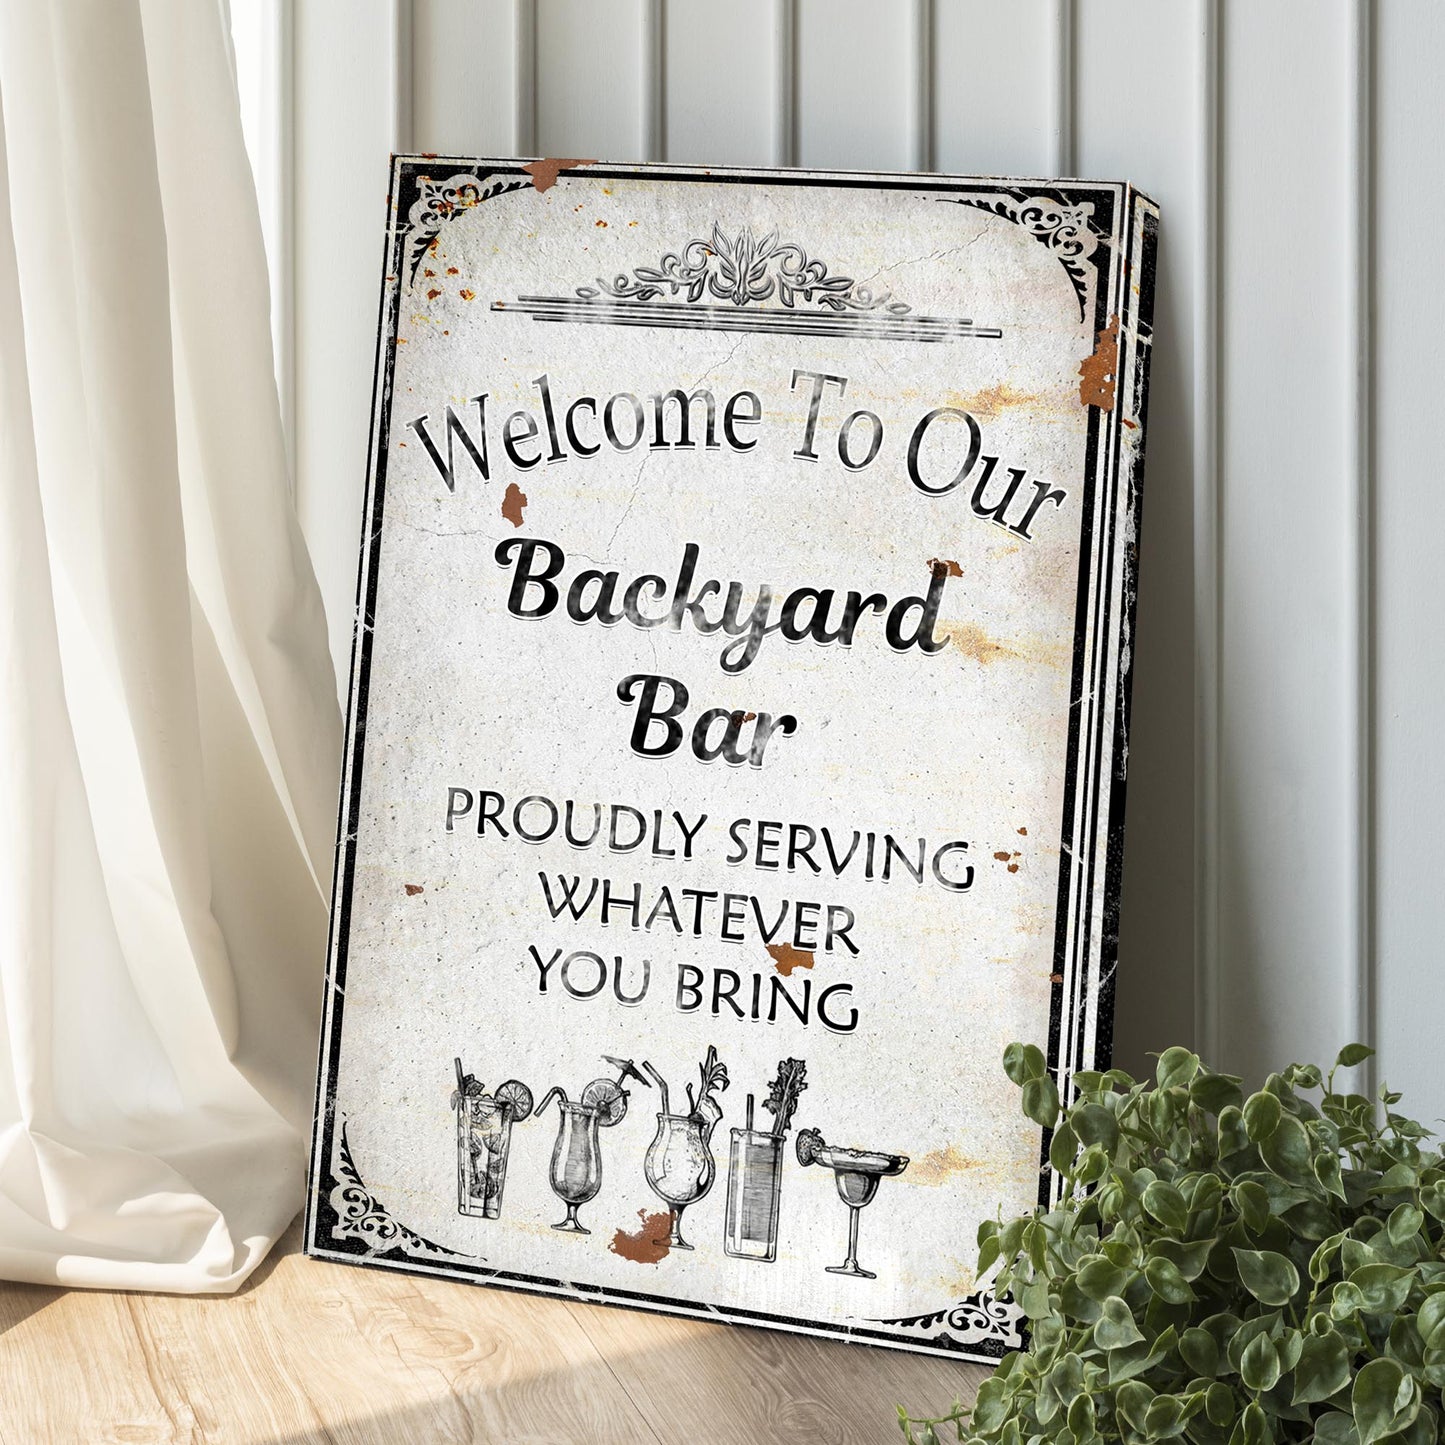 Backyard Bar Sign Style 2 - Image by Tailored Canvases